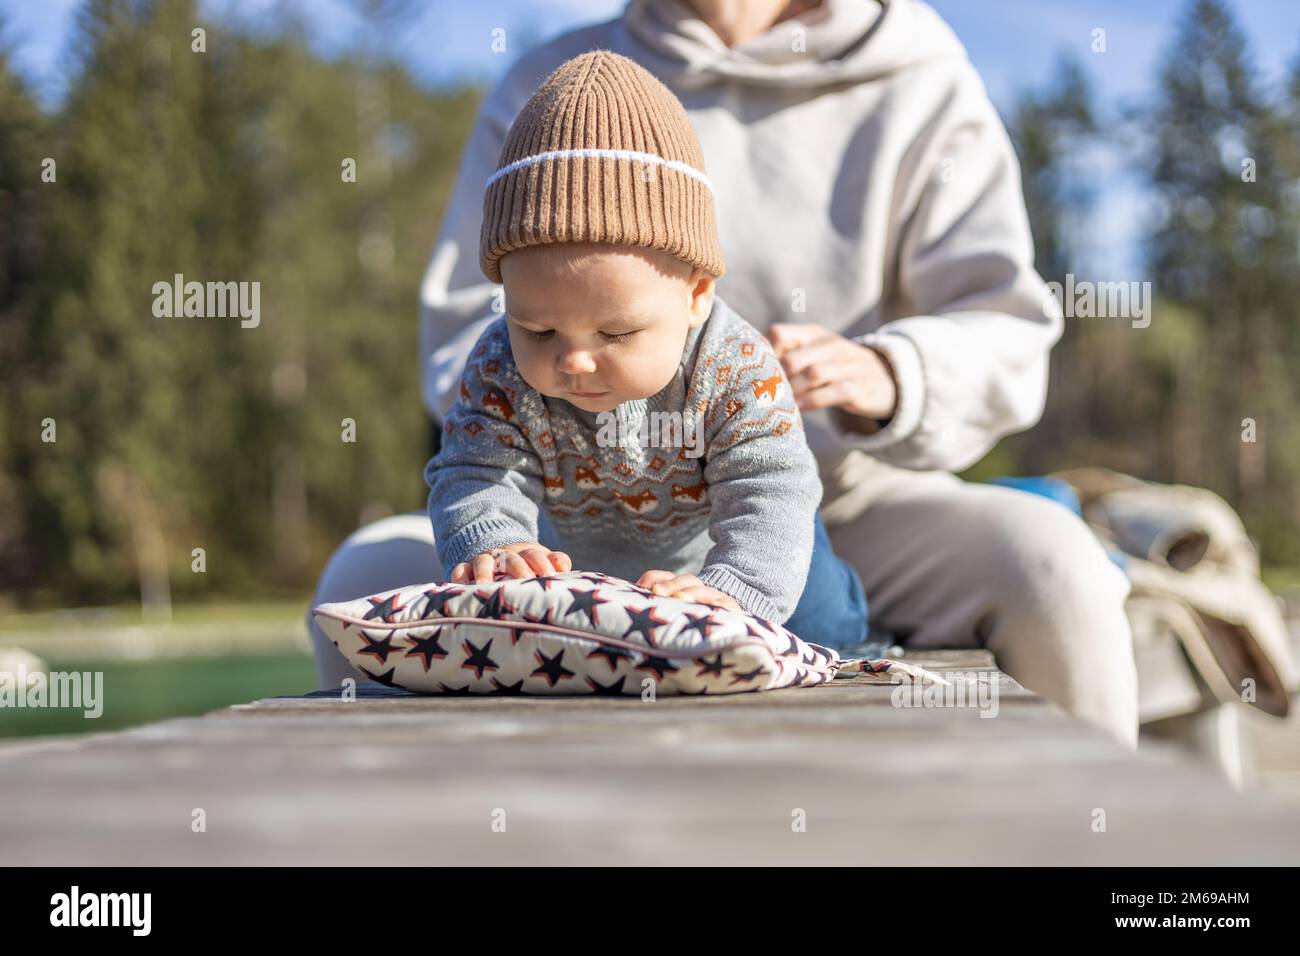 Happy family. Young mother playing with her baby boy infant oudoors on sunny autumn day. Portrait of mom and little son on wooden platform by lake. Positive human emotions, feelings, joy Stock Photo